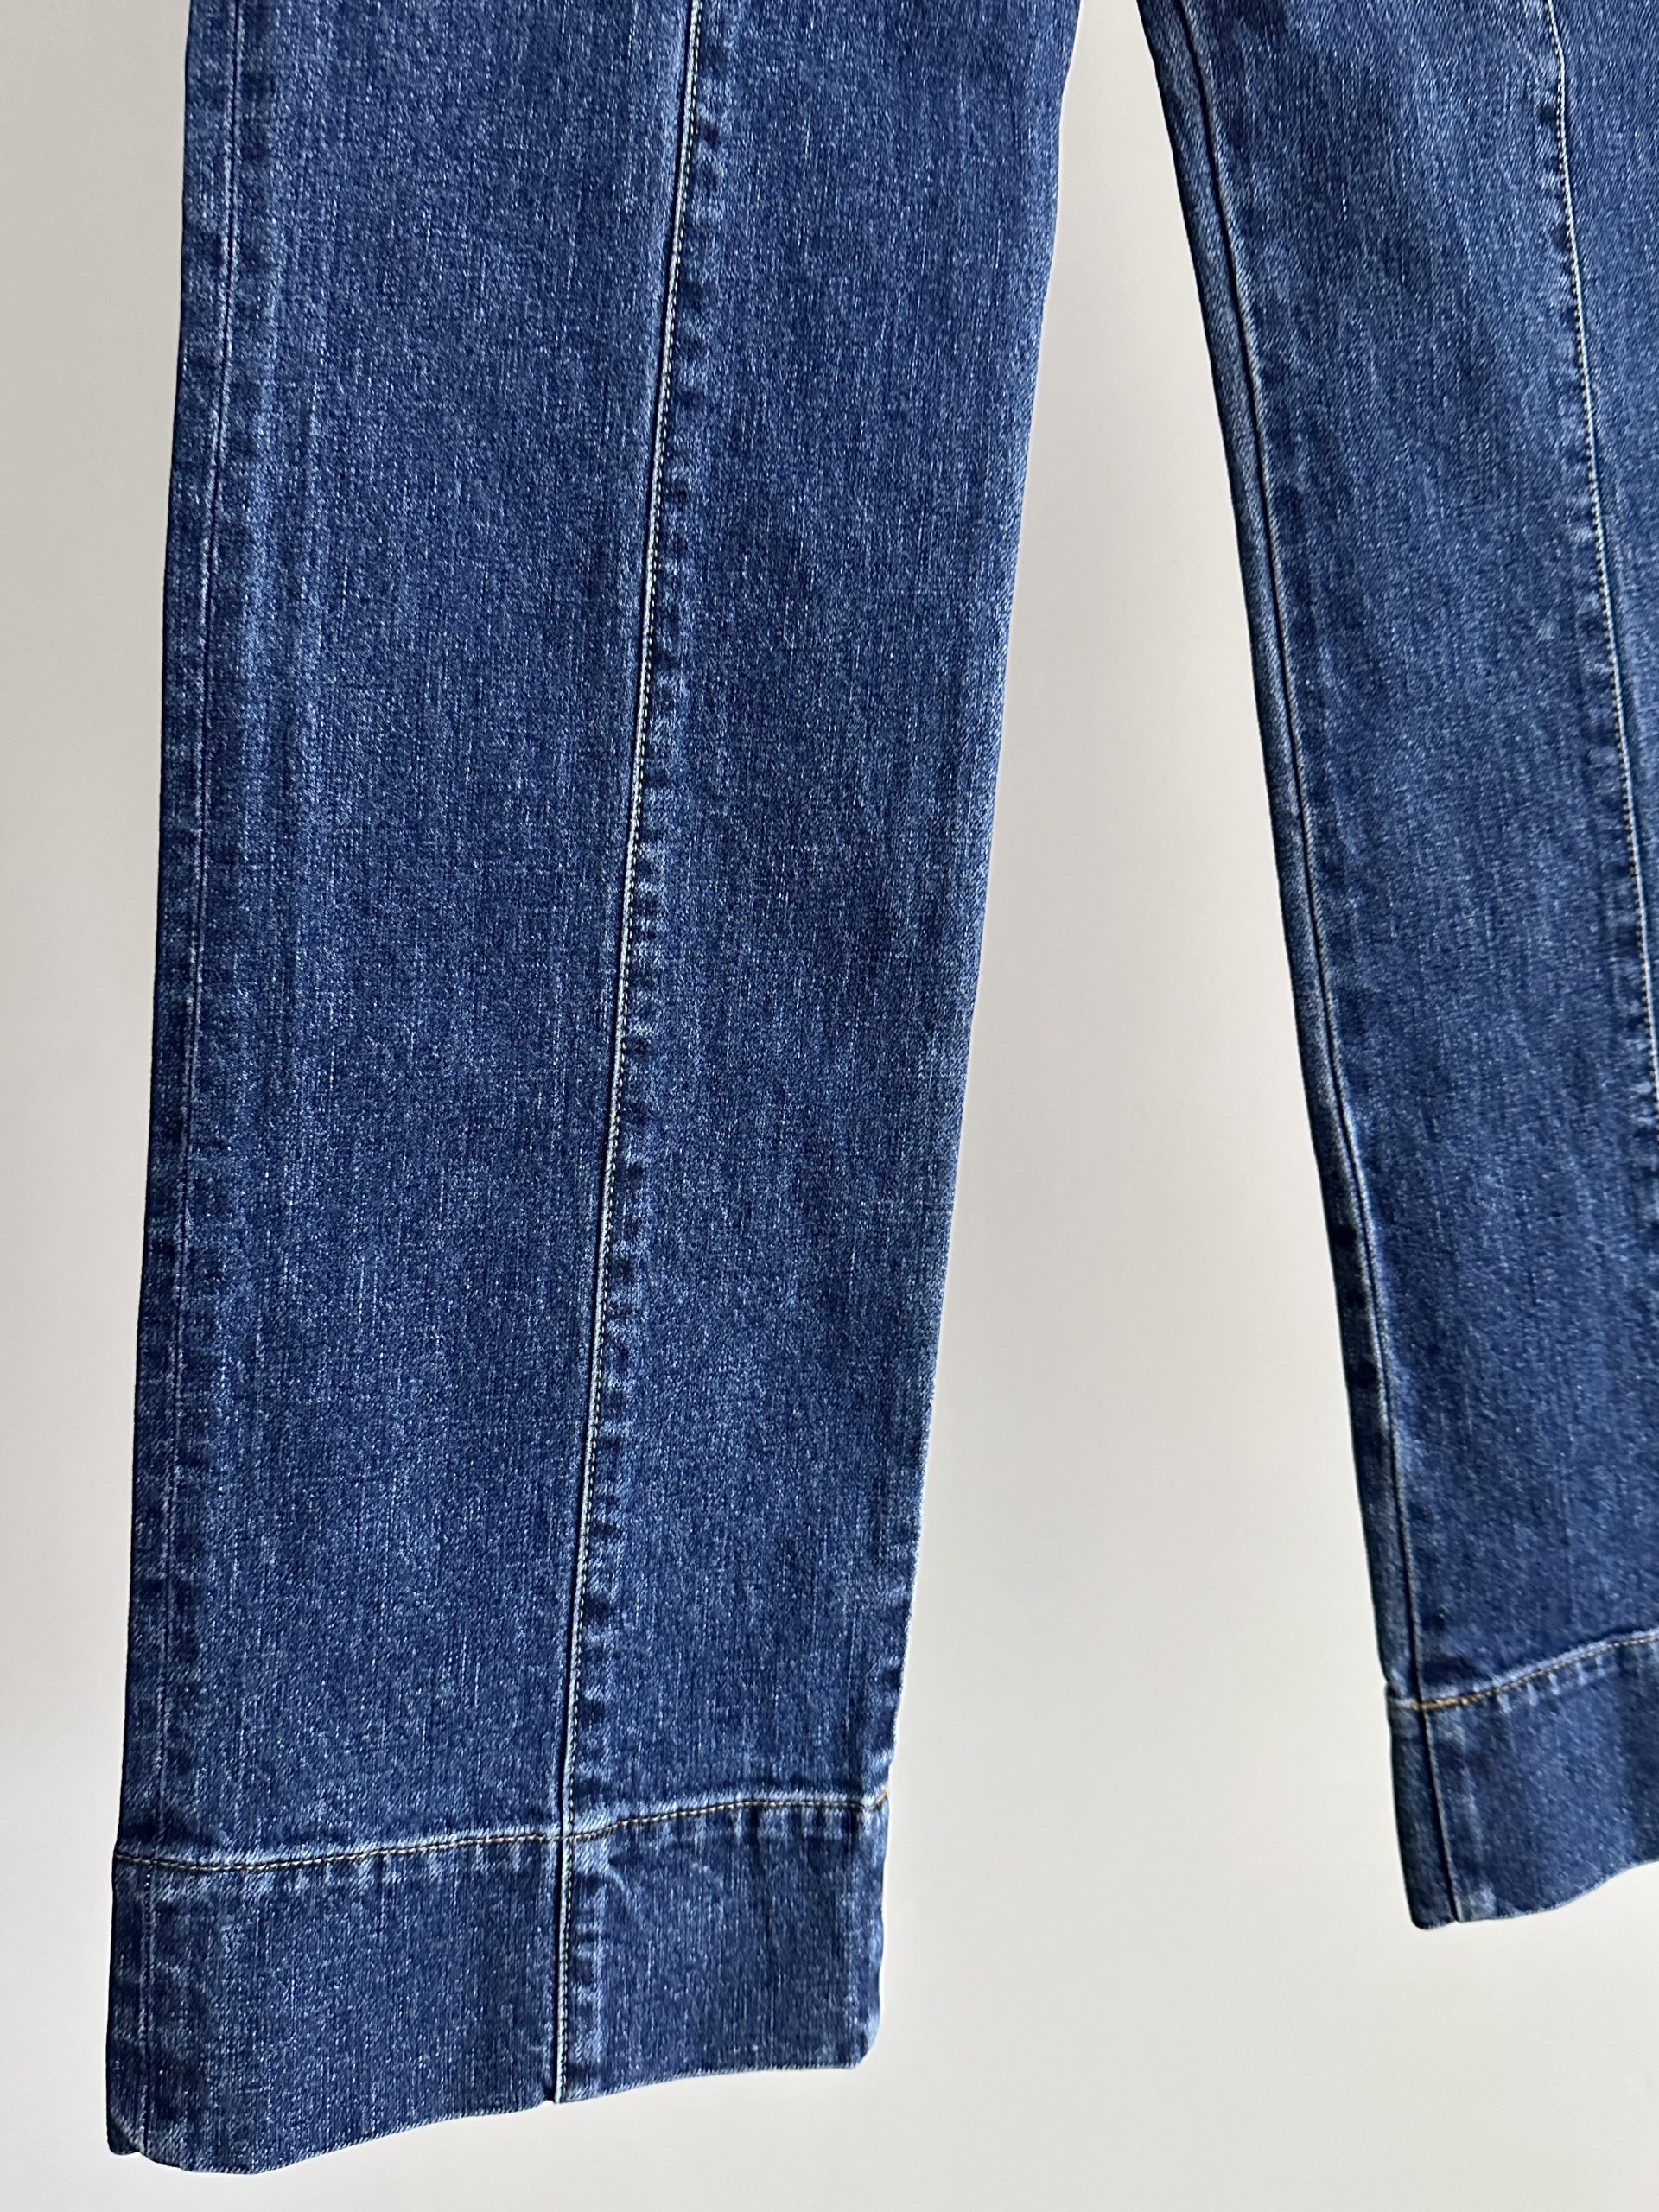 【FETICO】WASHED HIGH RISE STRAIGHT JEANS